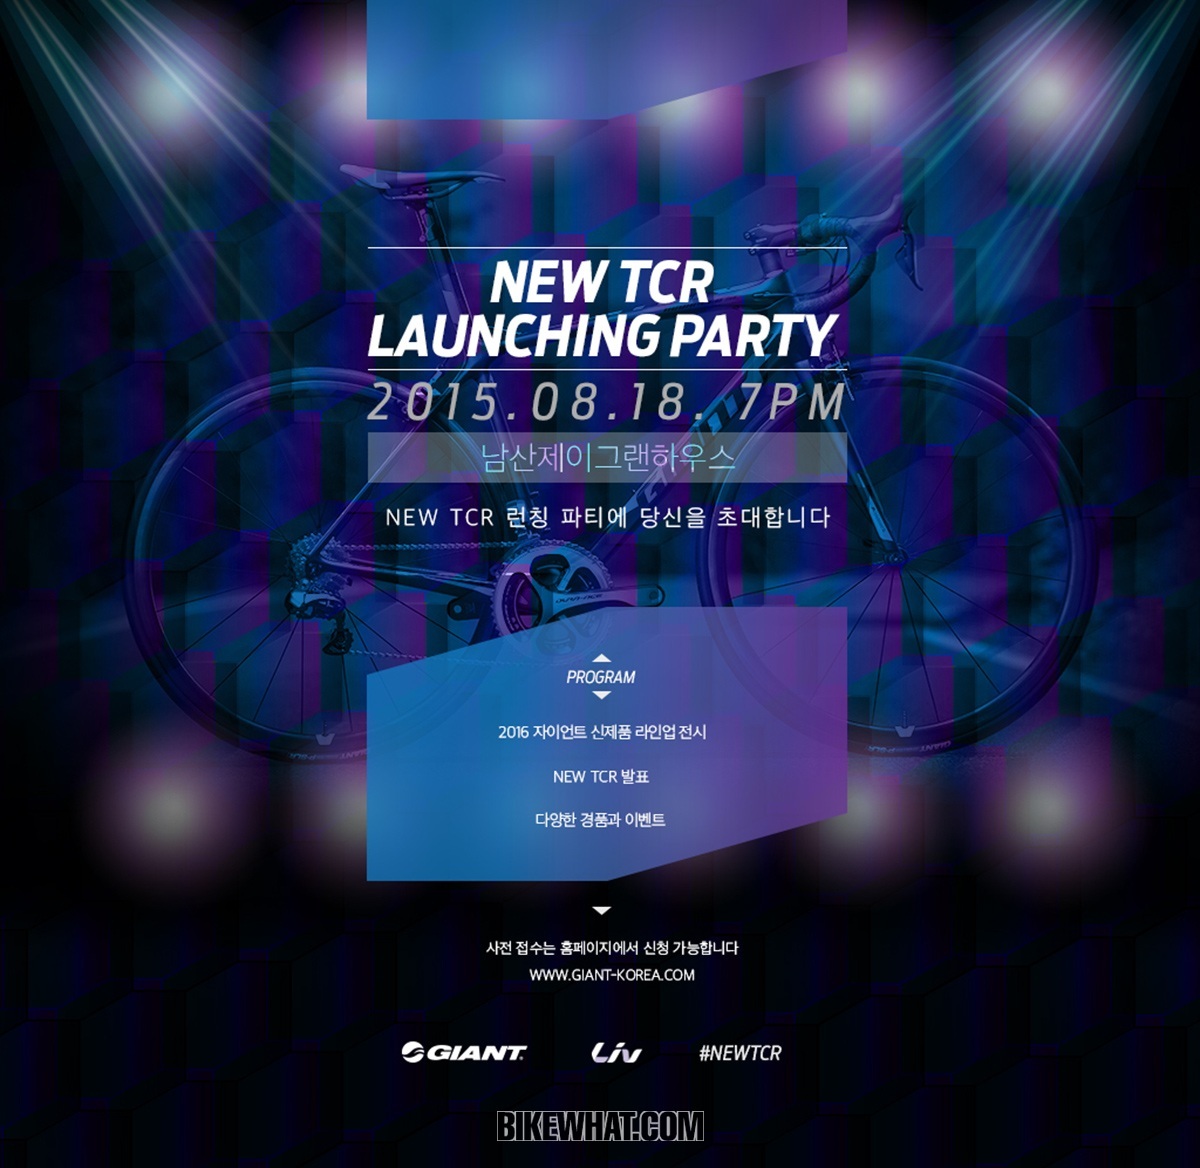 Giant_New_TCR_Launching_Party_01.jpg